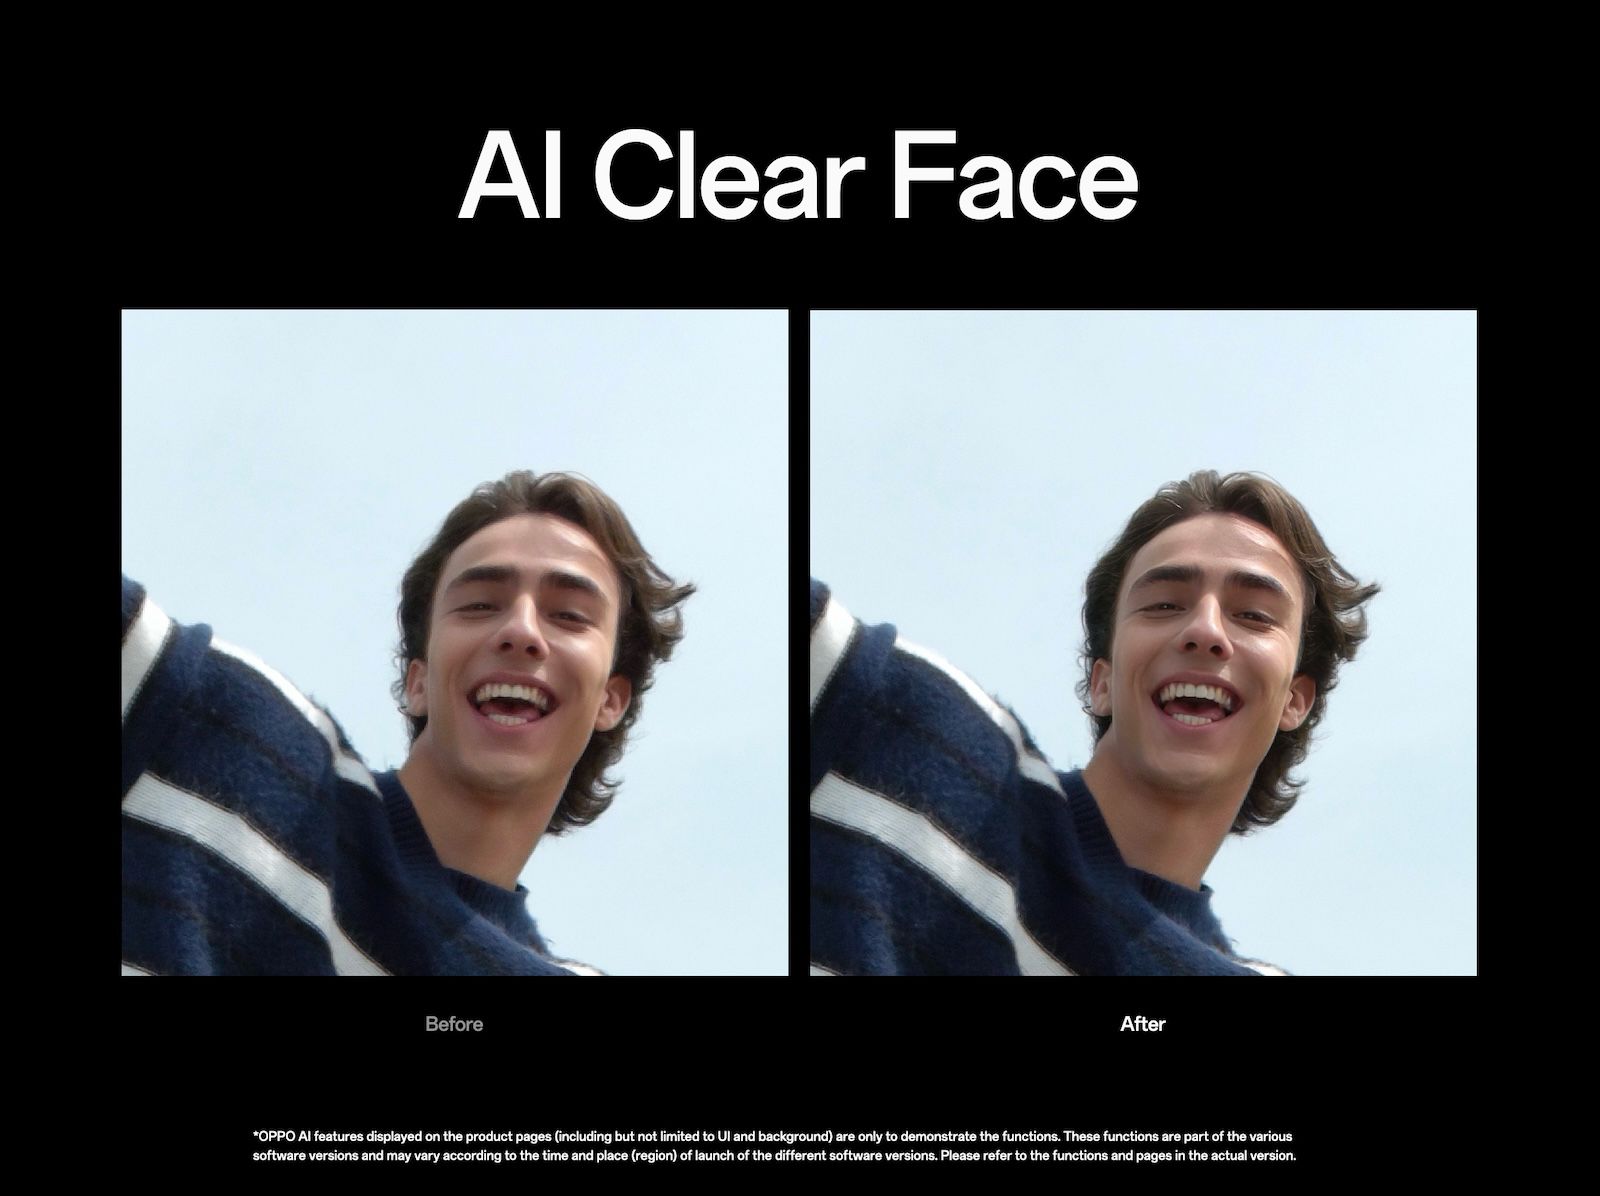 AI Clear Face ensures everyone in a group shot, even those far away from the camera